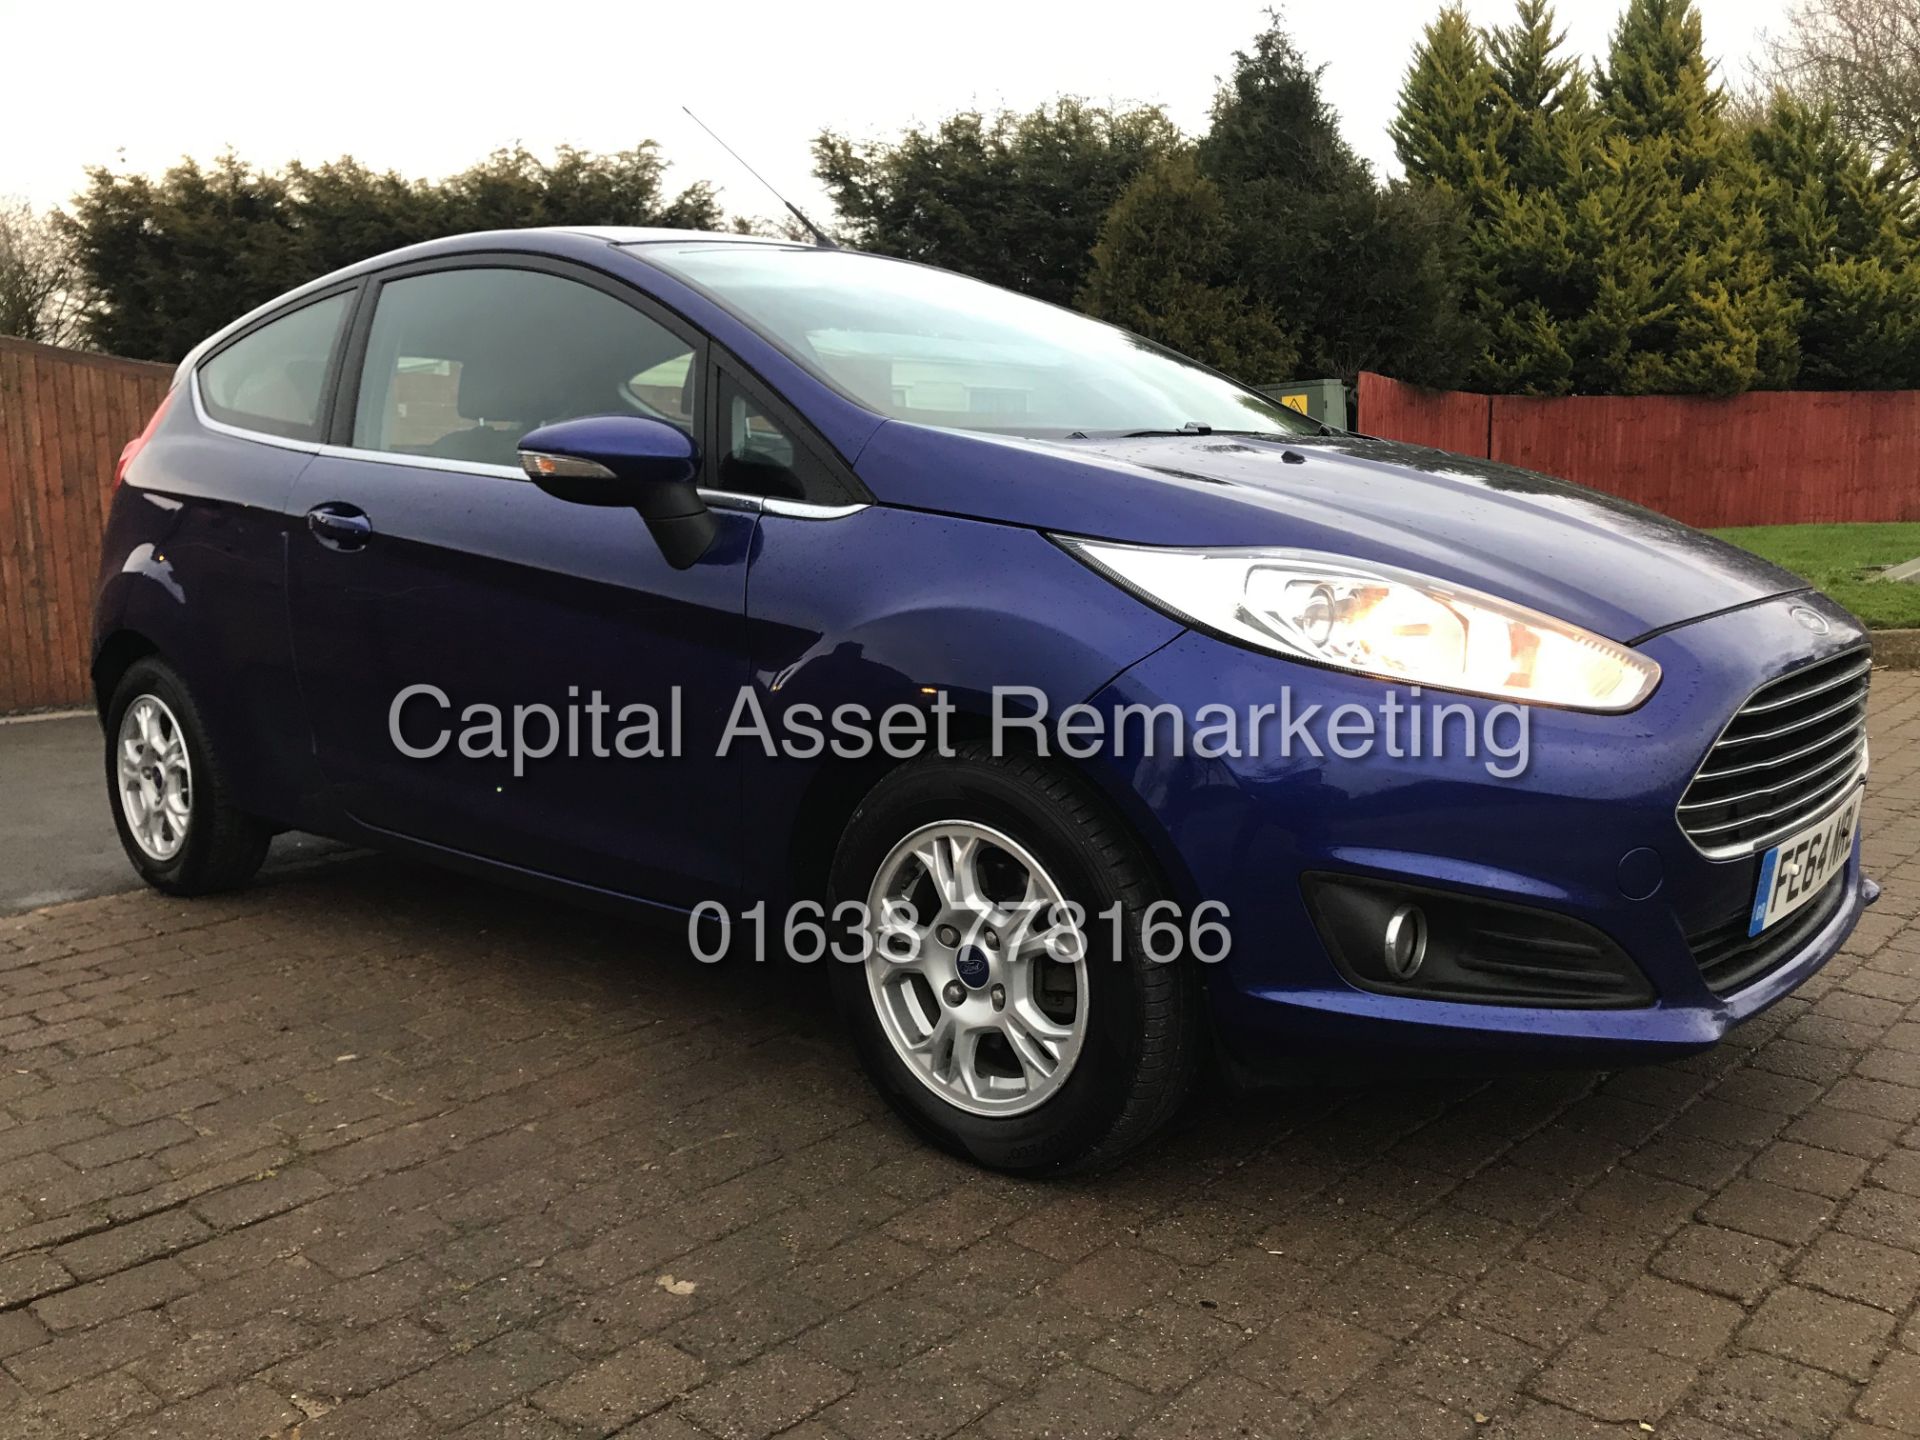 ON SALE FORD FIESTA 1.6TDCI "ZETEC ECONETIC" 1 OWNER FSH (2015 MODEL) ZERO £ ROAD TAX - AIR CON - Image 3 of 27